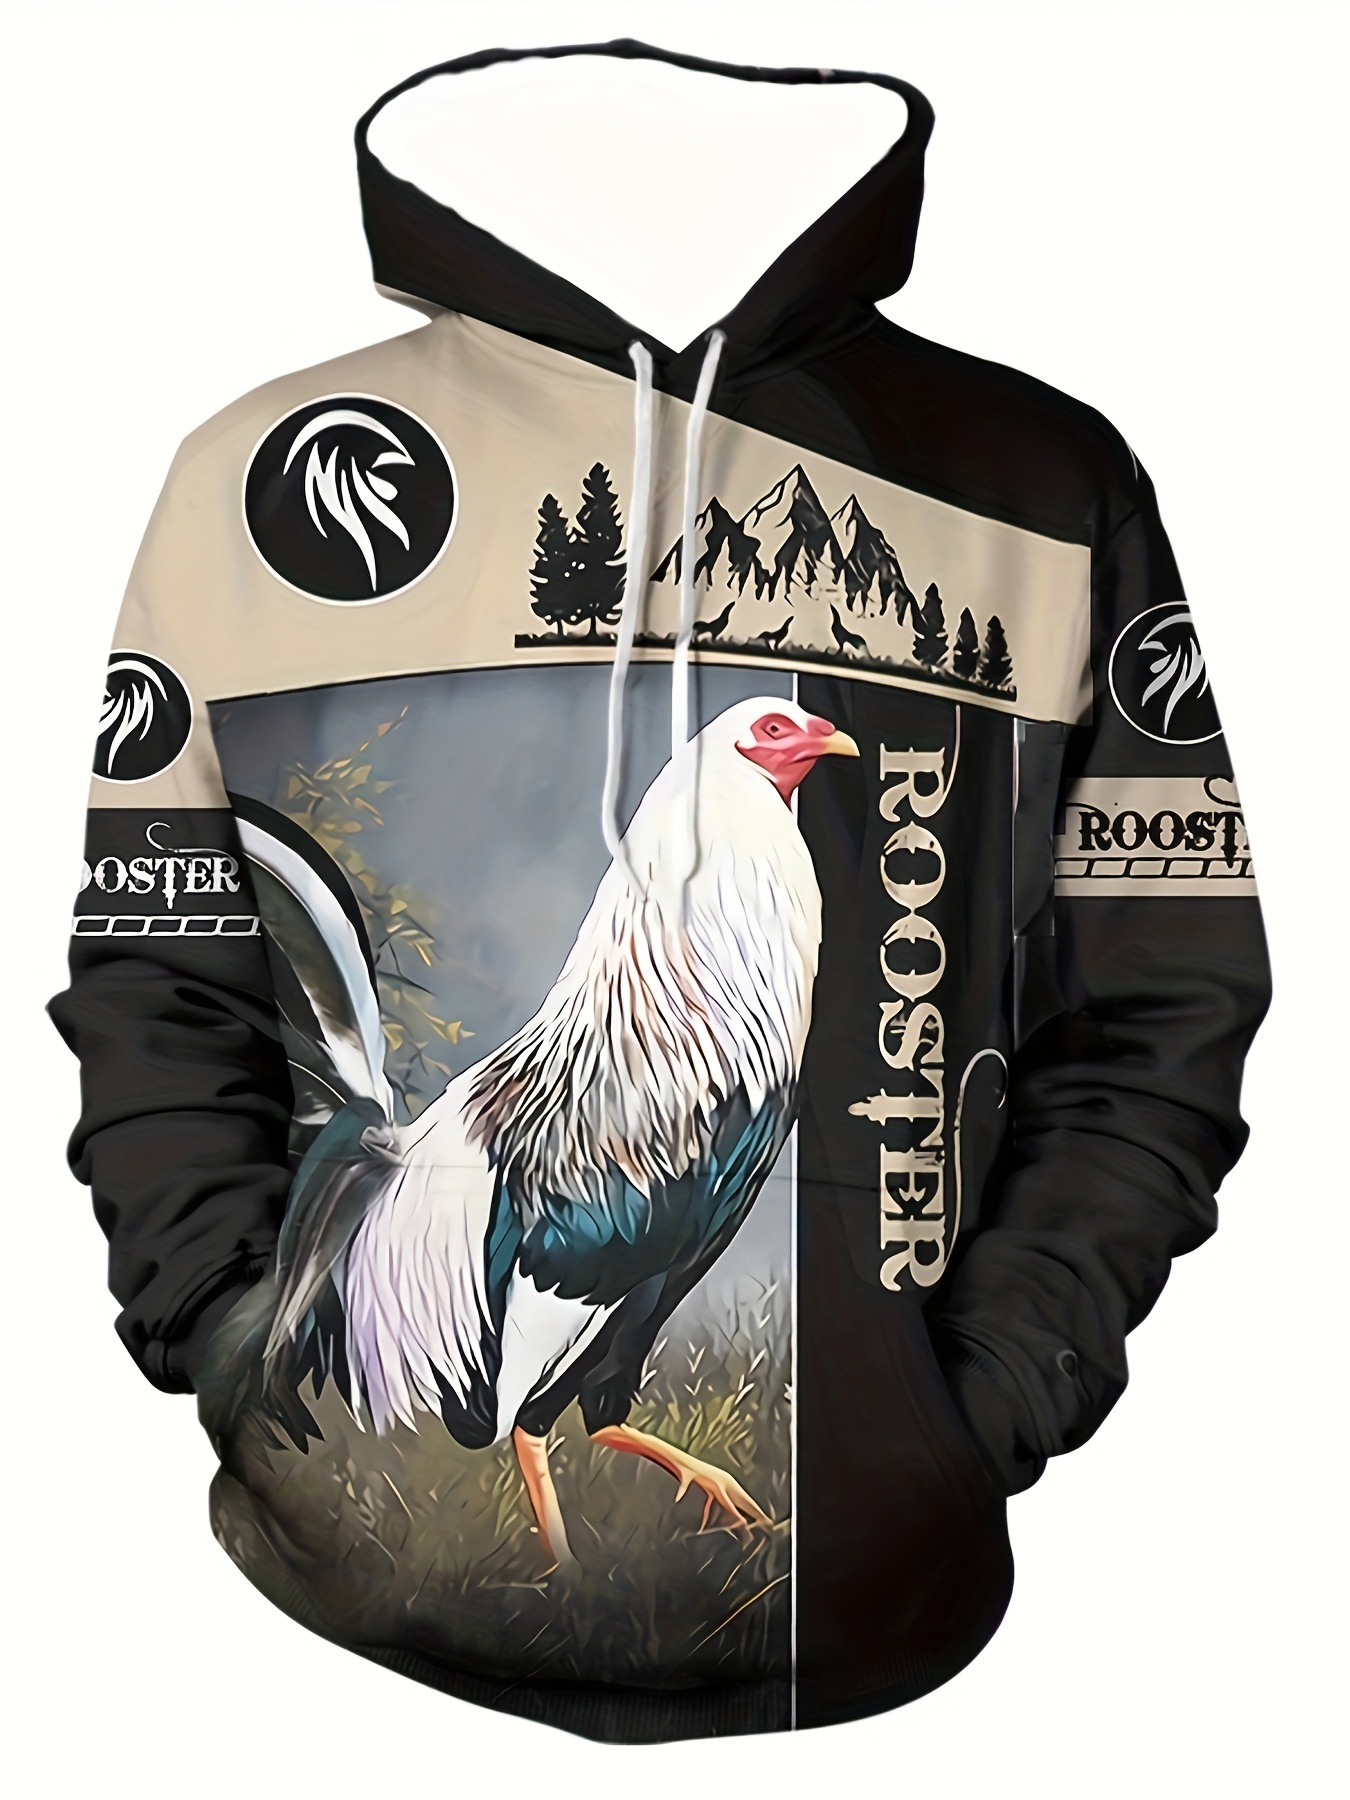 rooster print hoodie cool hoodies for men mens casual graphic design hooded sweatshirt streetwear for winter fall as gifts details 1